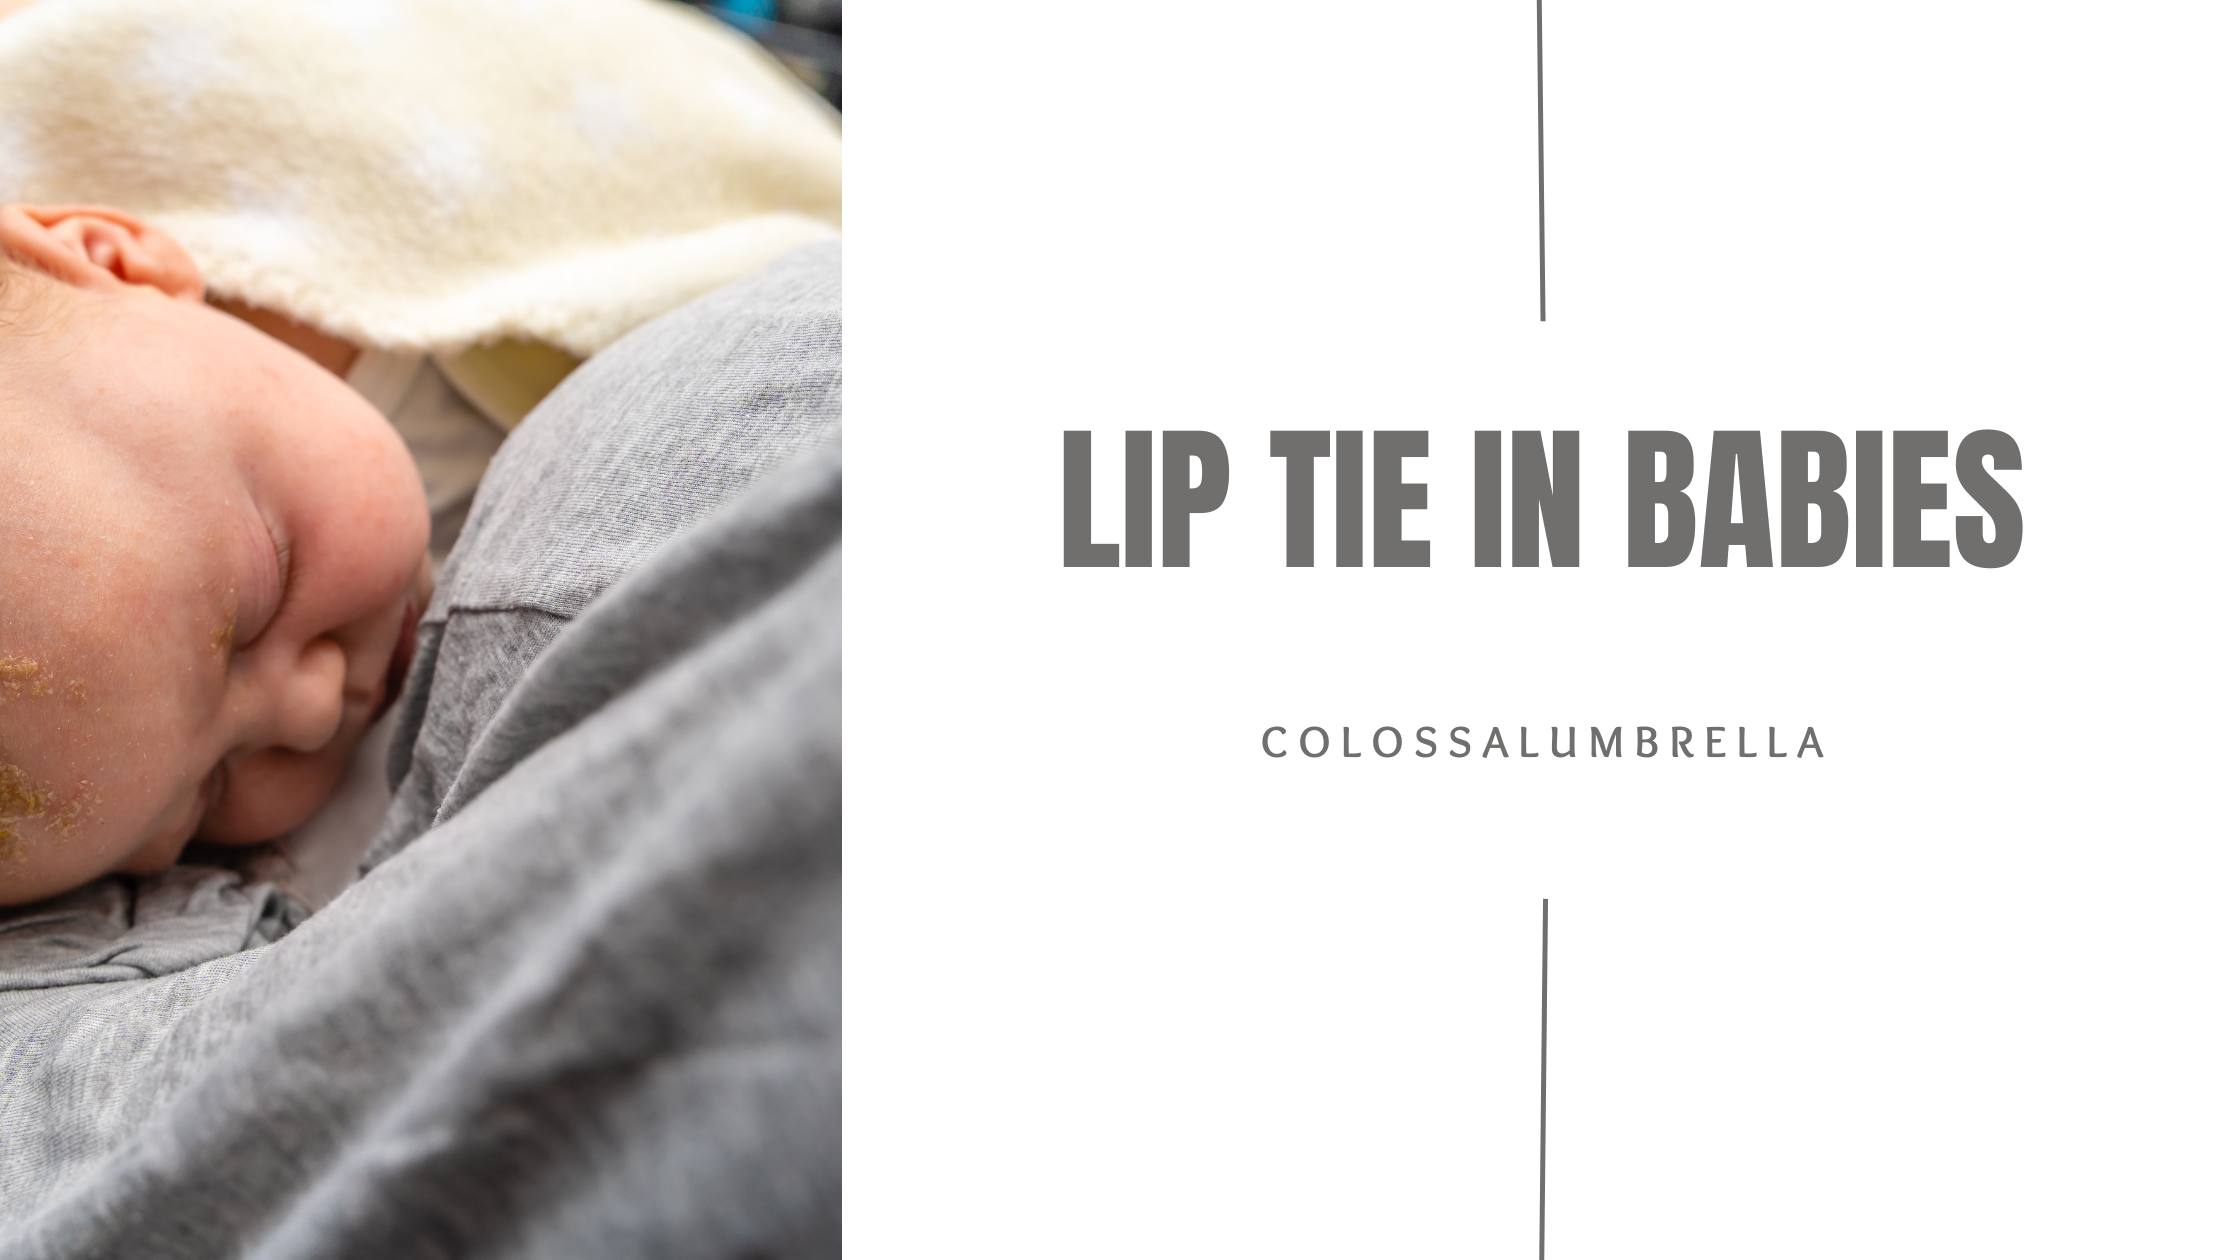 Lip Tie Problems Later in Life